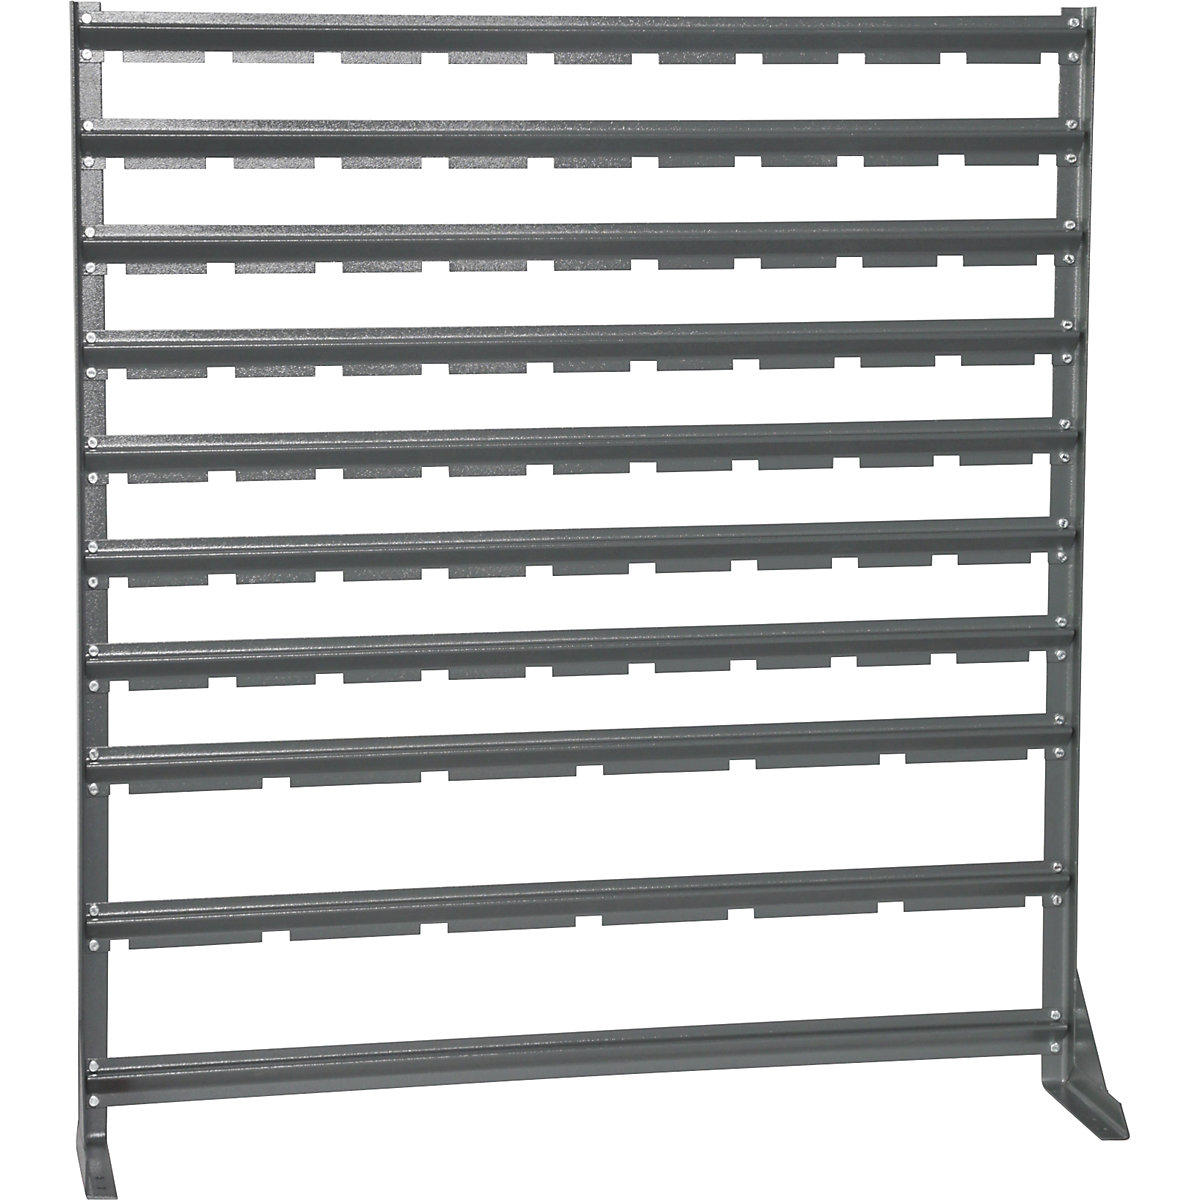 Small parts shelf unit, width 1020 mm, without open fronted storage bins, HxD 1110 x 235 mm-3